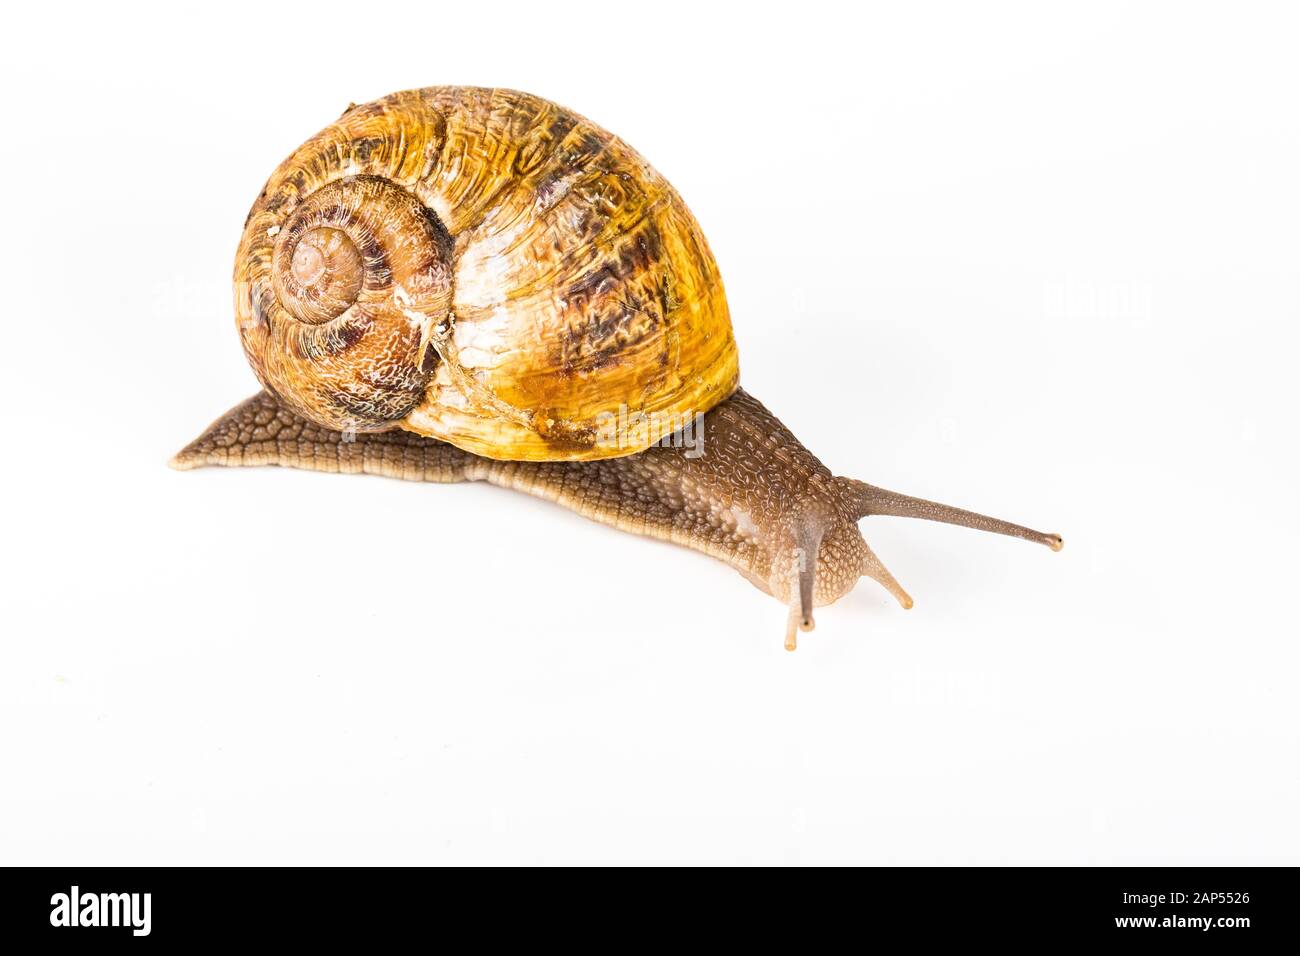 Brown snail on white background. To be used for background for fashion cosmetics and treatments made with snails slime. Stock Photo